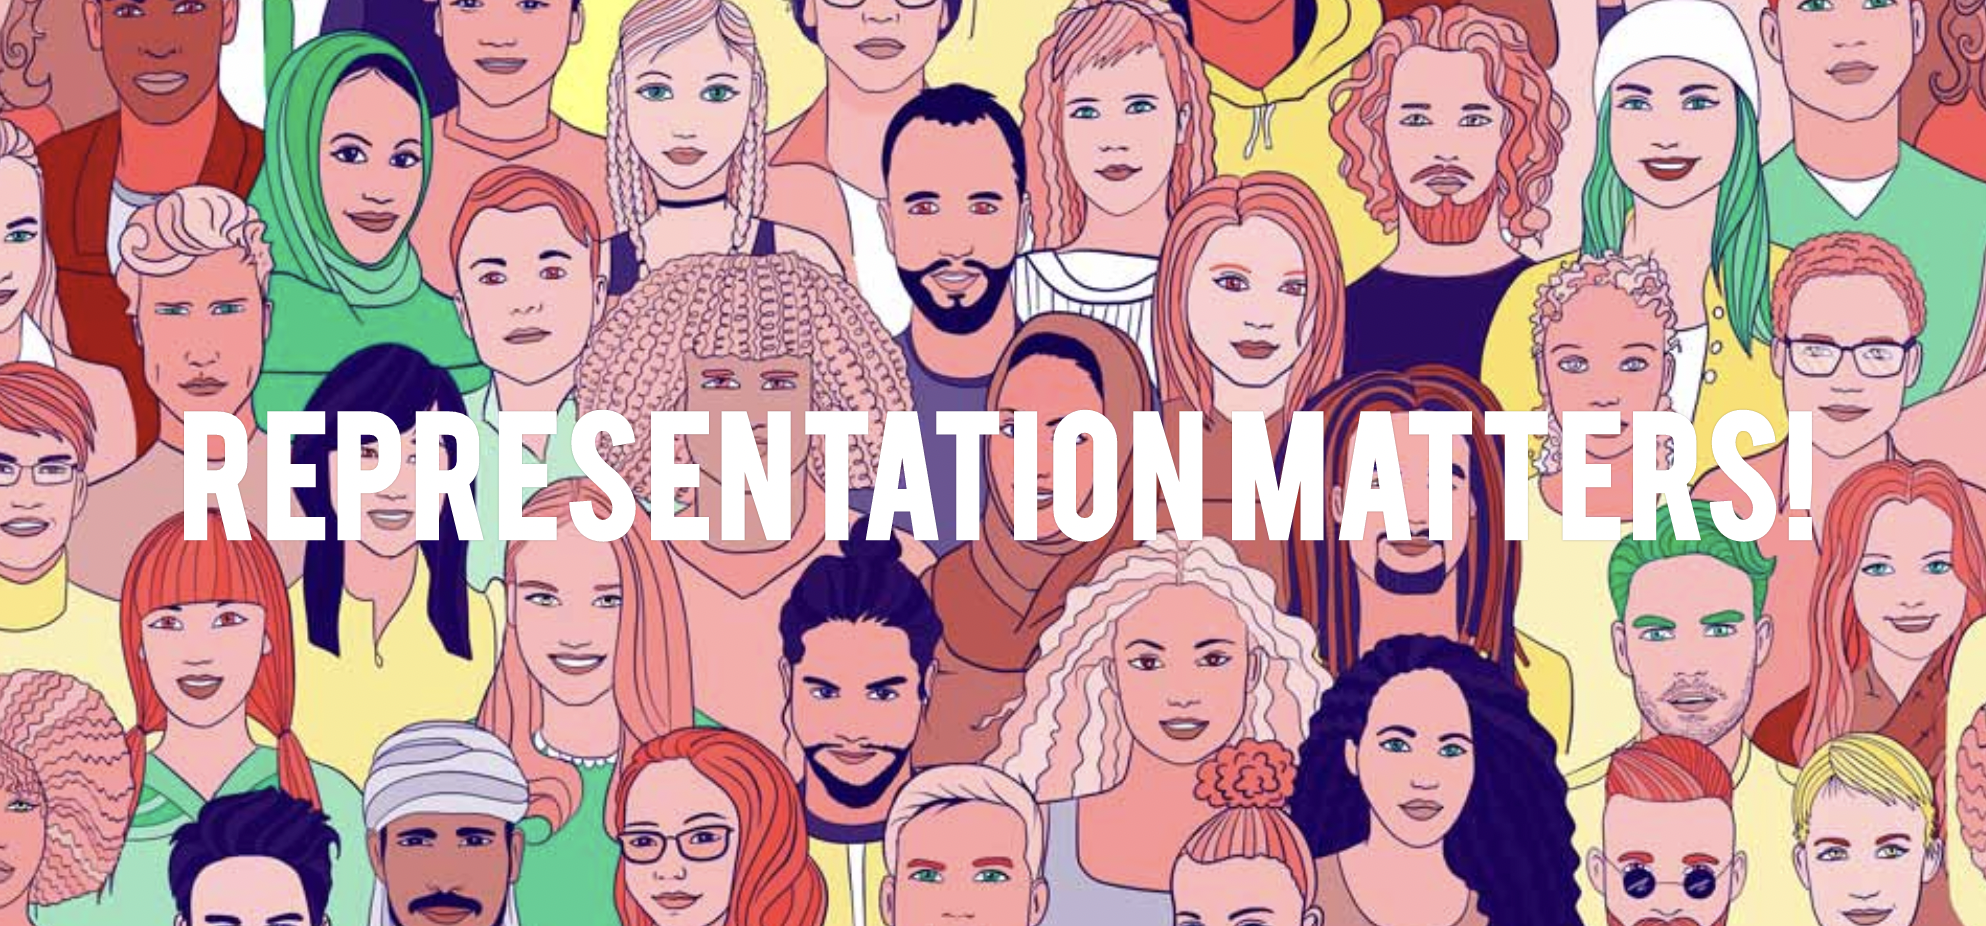 Animated graphic of ~20 diverse people with the text " Representation Matters!" laid over it in white